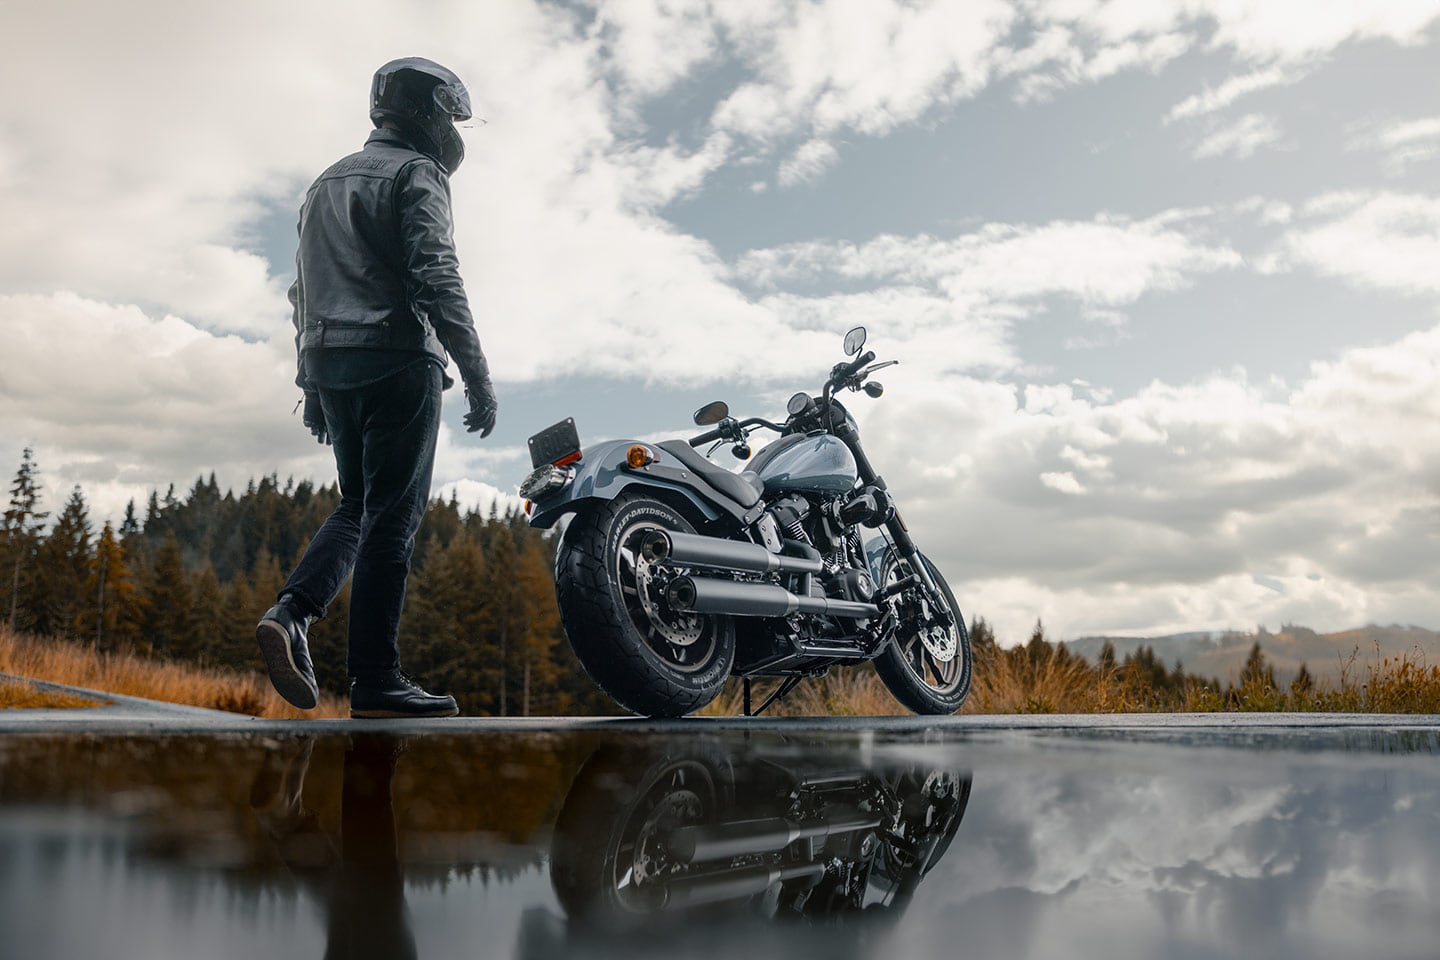 The Low Rider is one of the most performance-oriented models in H-D’s cruiser lineup, but handling is ultimately compromised by geometry that’s dictated by style. Enjoy it for what it is and it’s a blast.